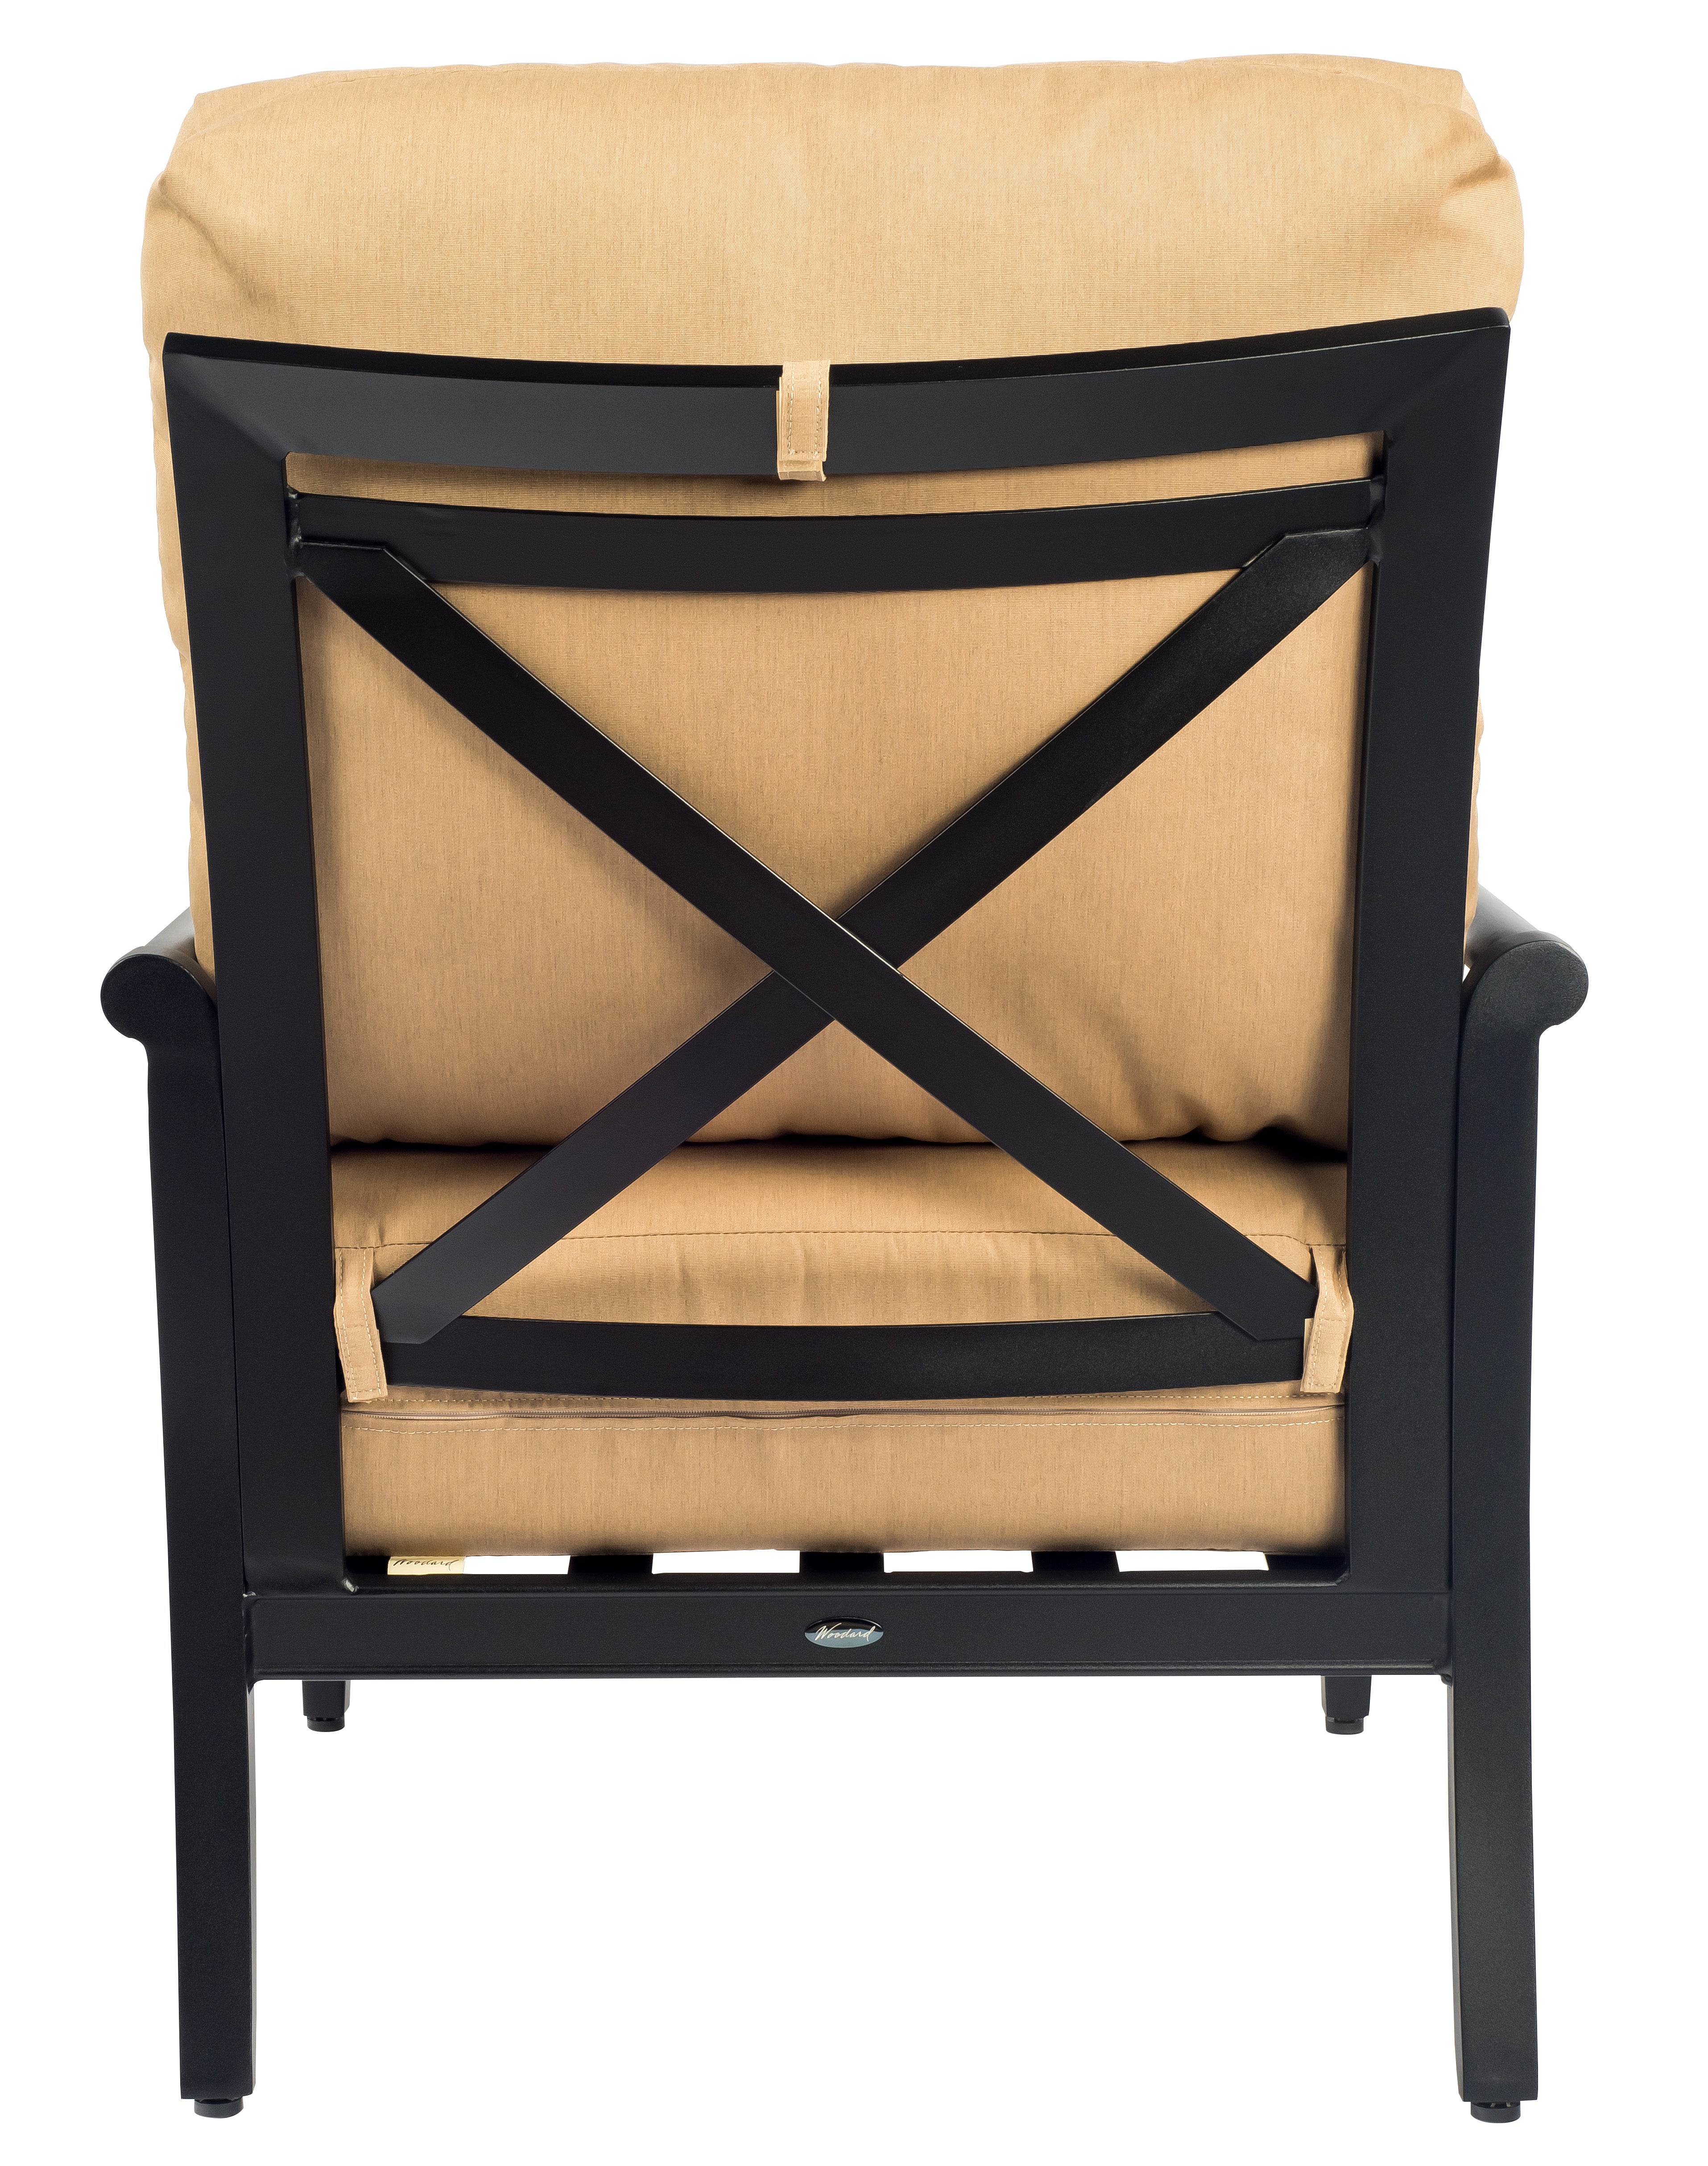 Andover Lounge Chair by Woodard